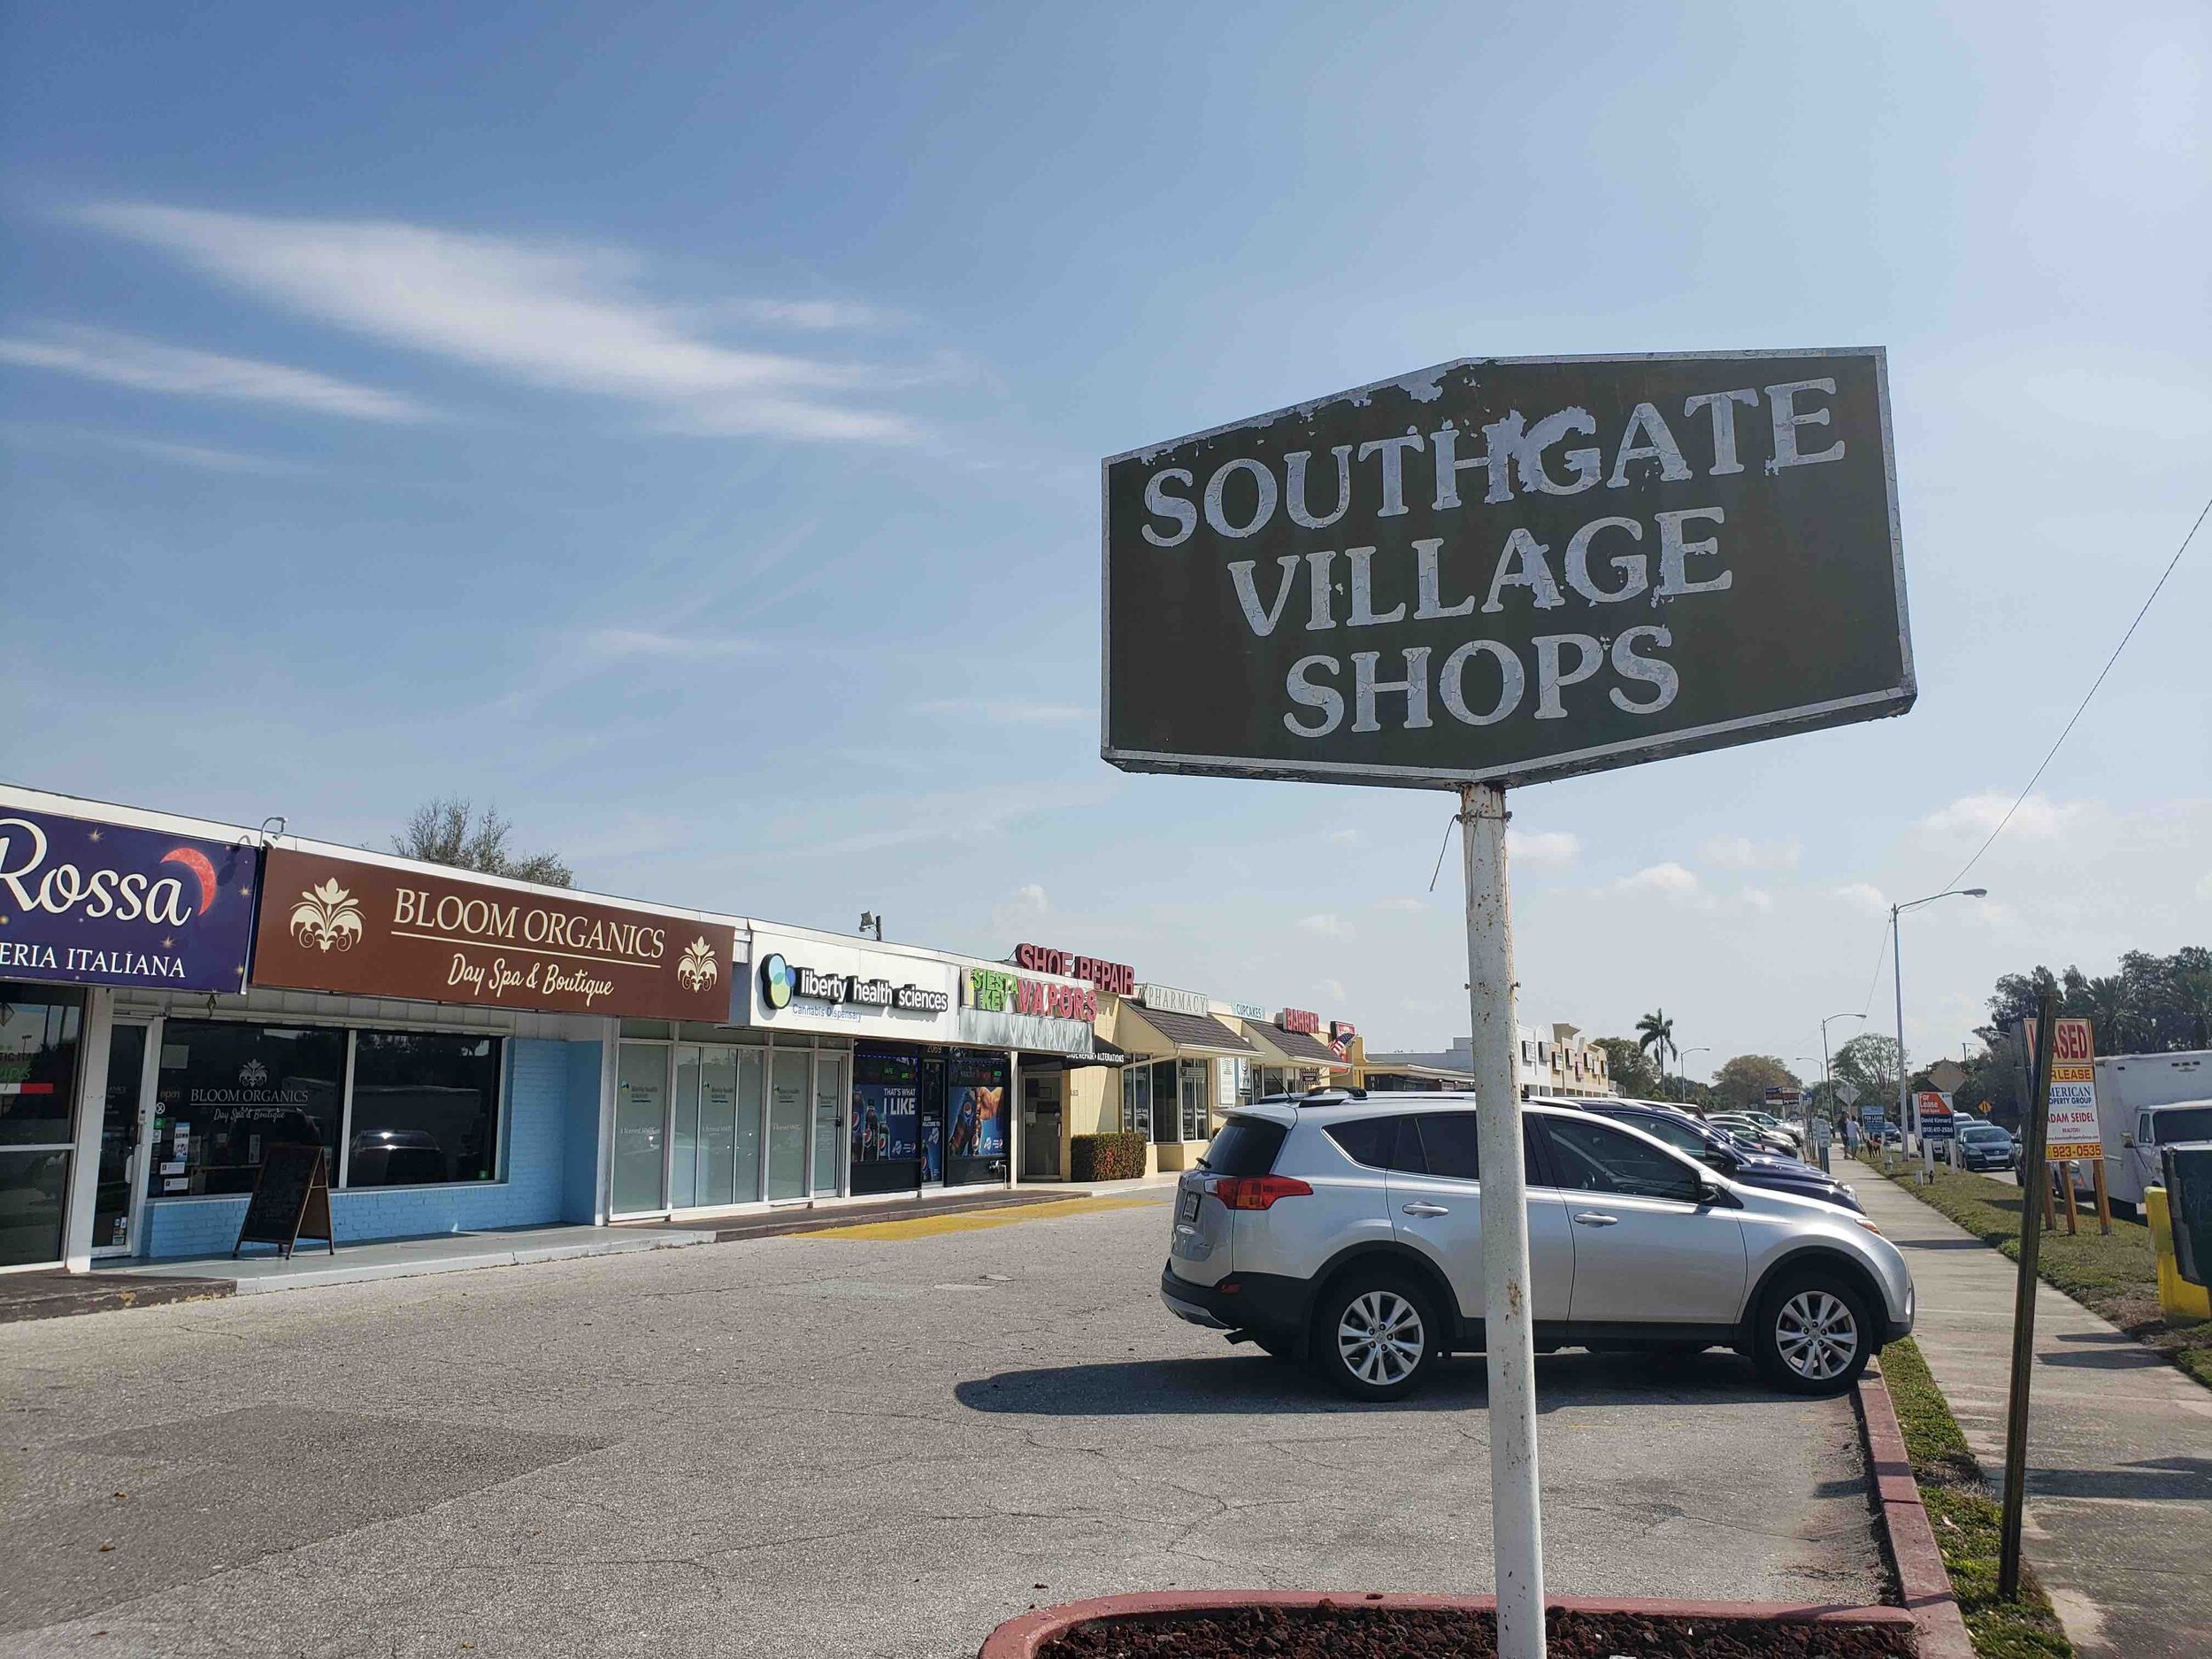  The Southside Village Shops lack for evident charm, elegance, or architectural character. However… 